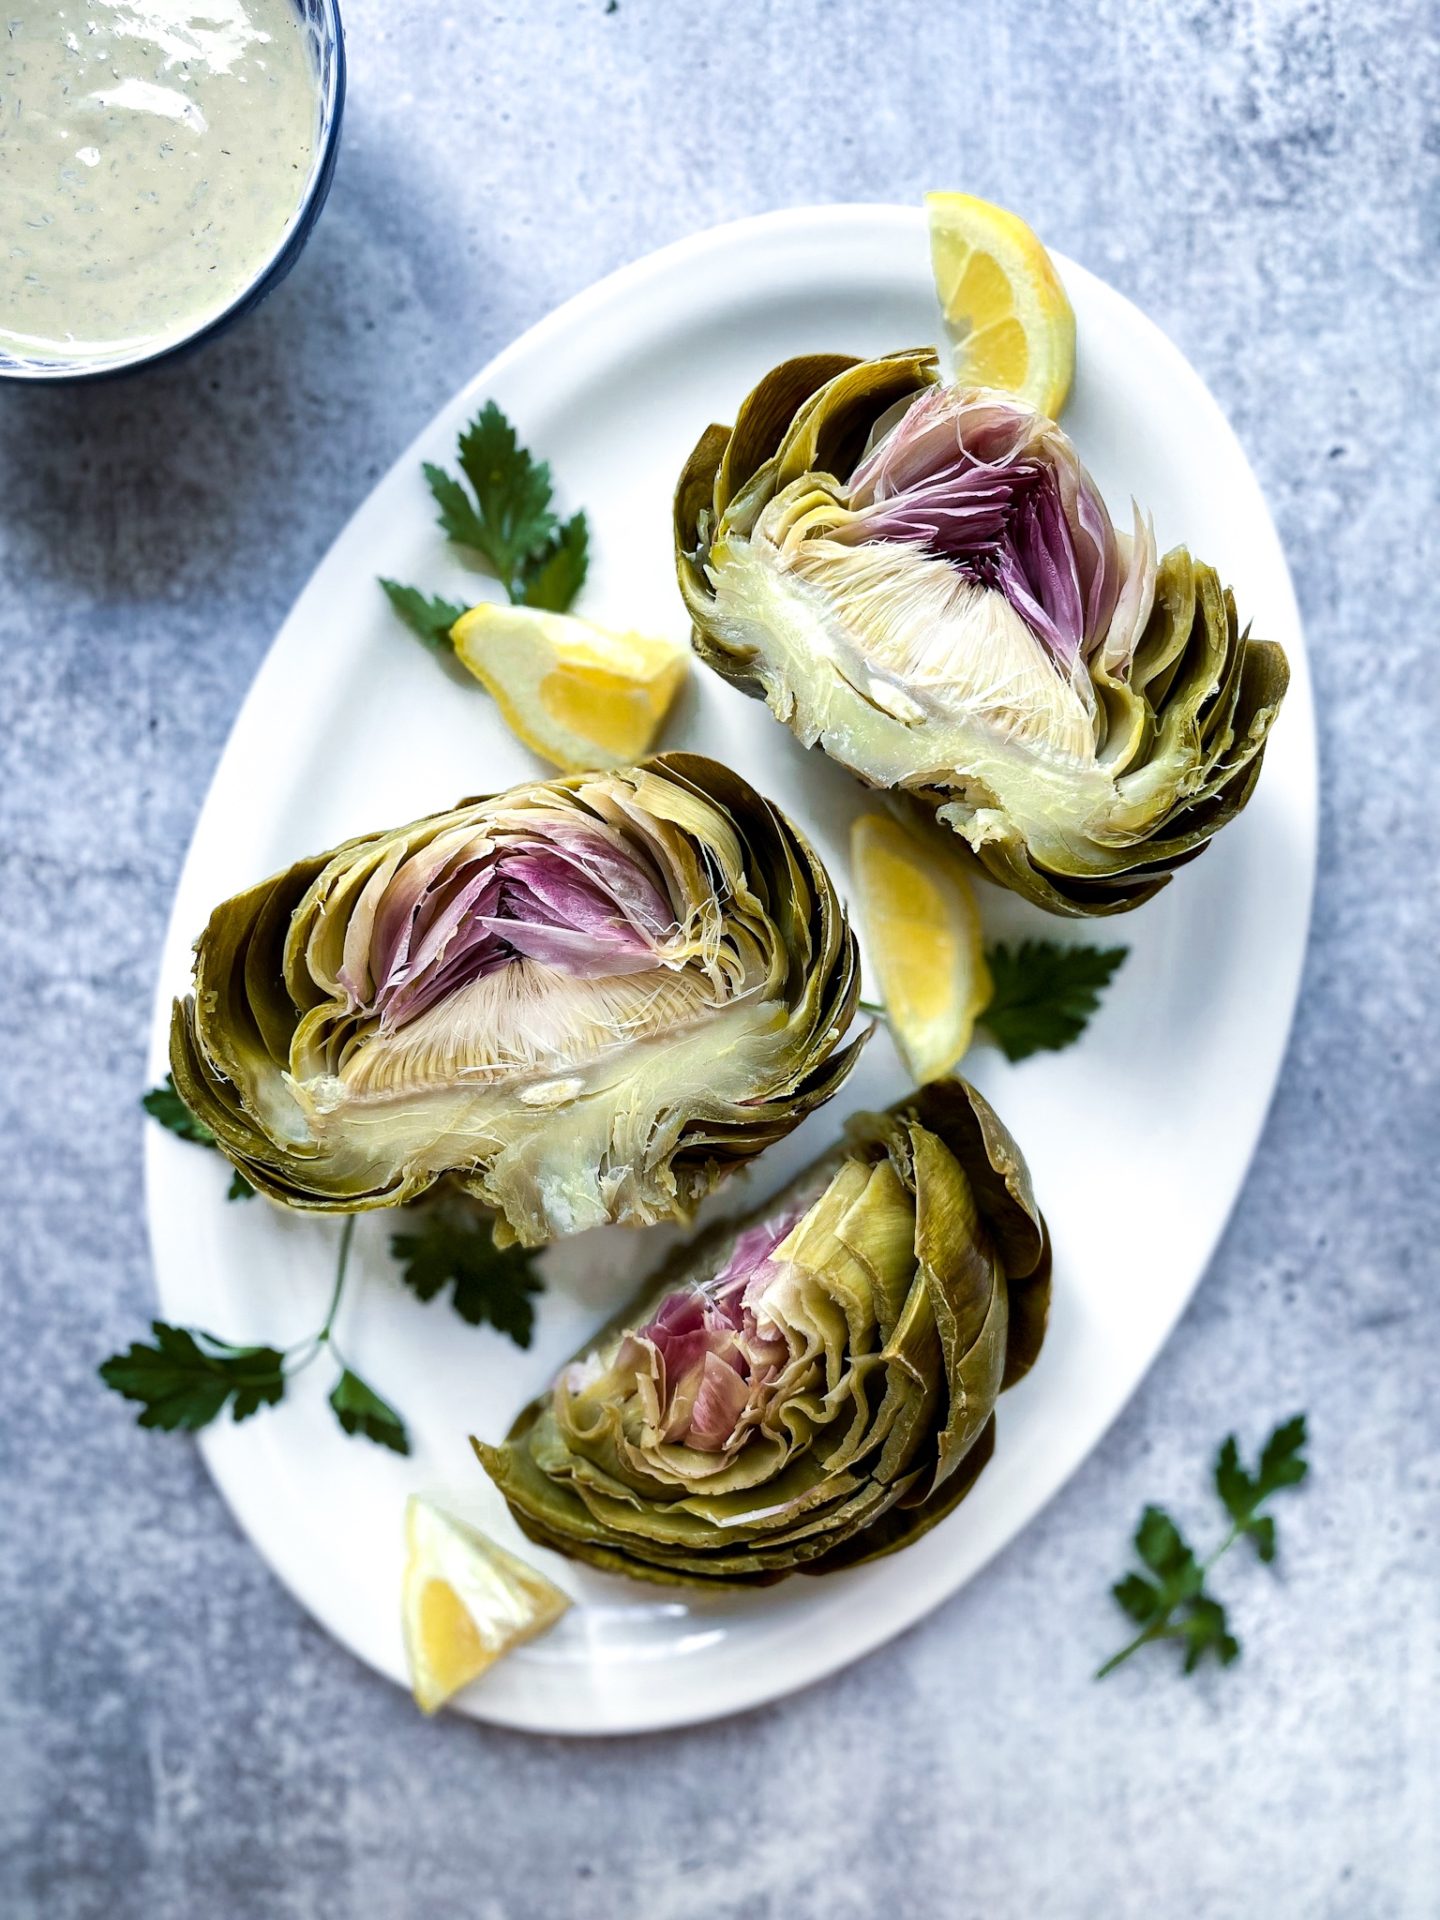 steamed artichokes on a white plate with tahini sauce